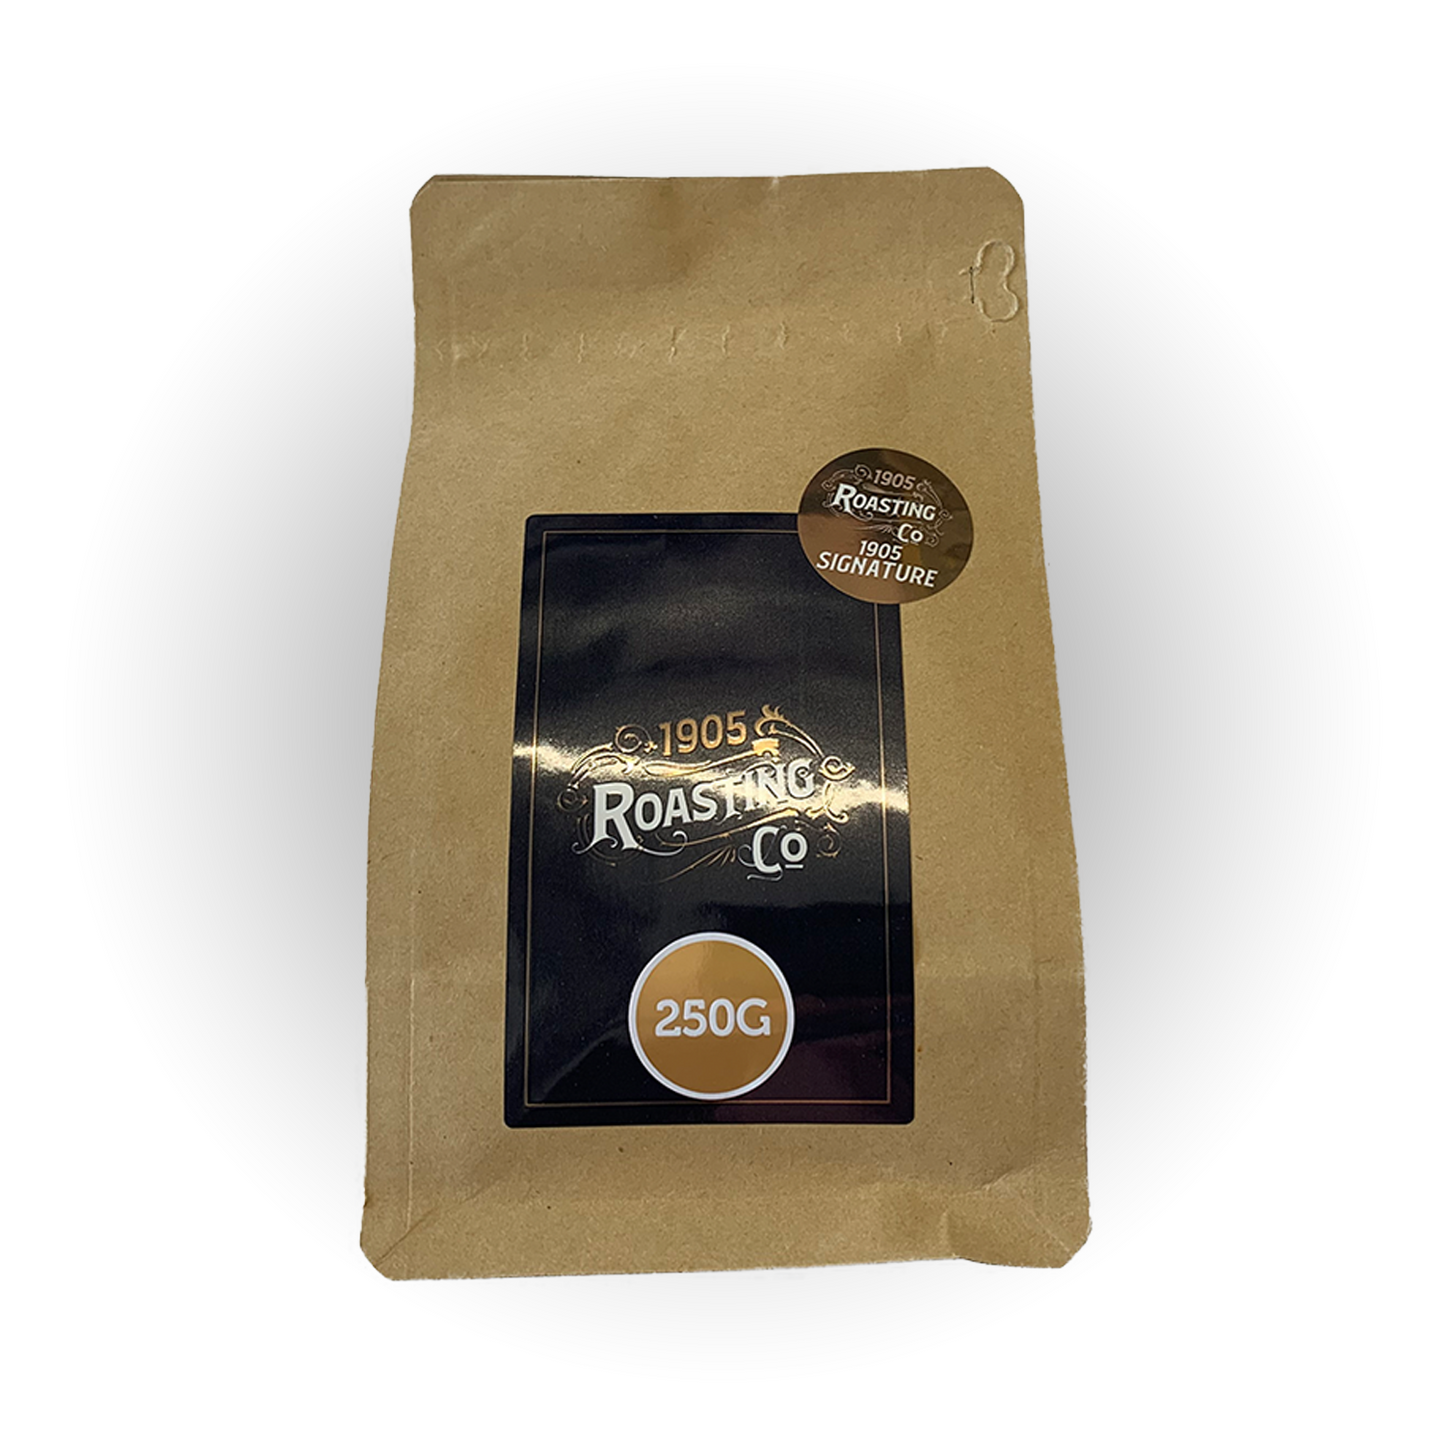 A brown paper bag of Perth coffee labeled "1905 Roasting Co." with a 250g weight indicator, on a plain white background.